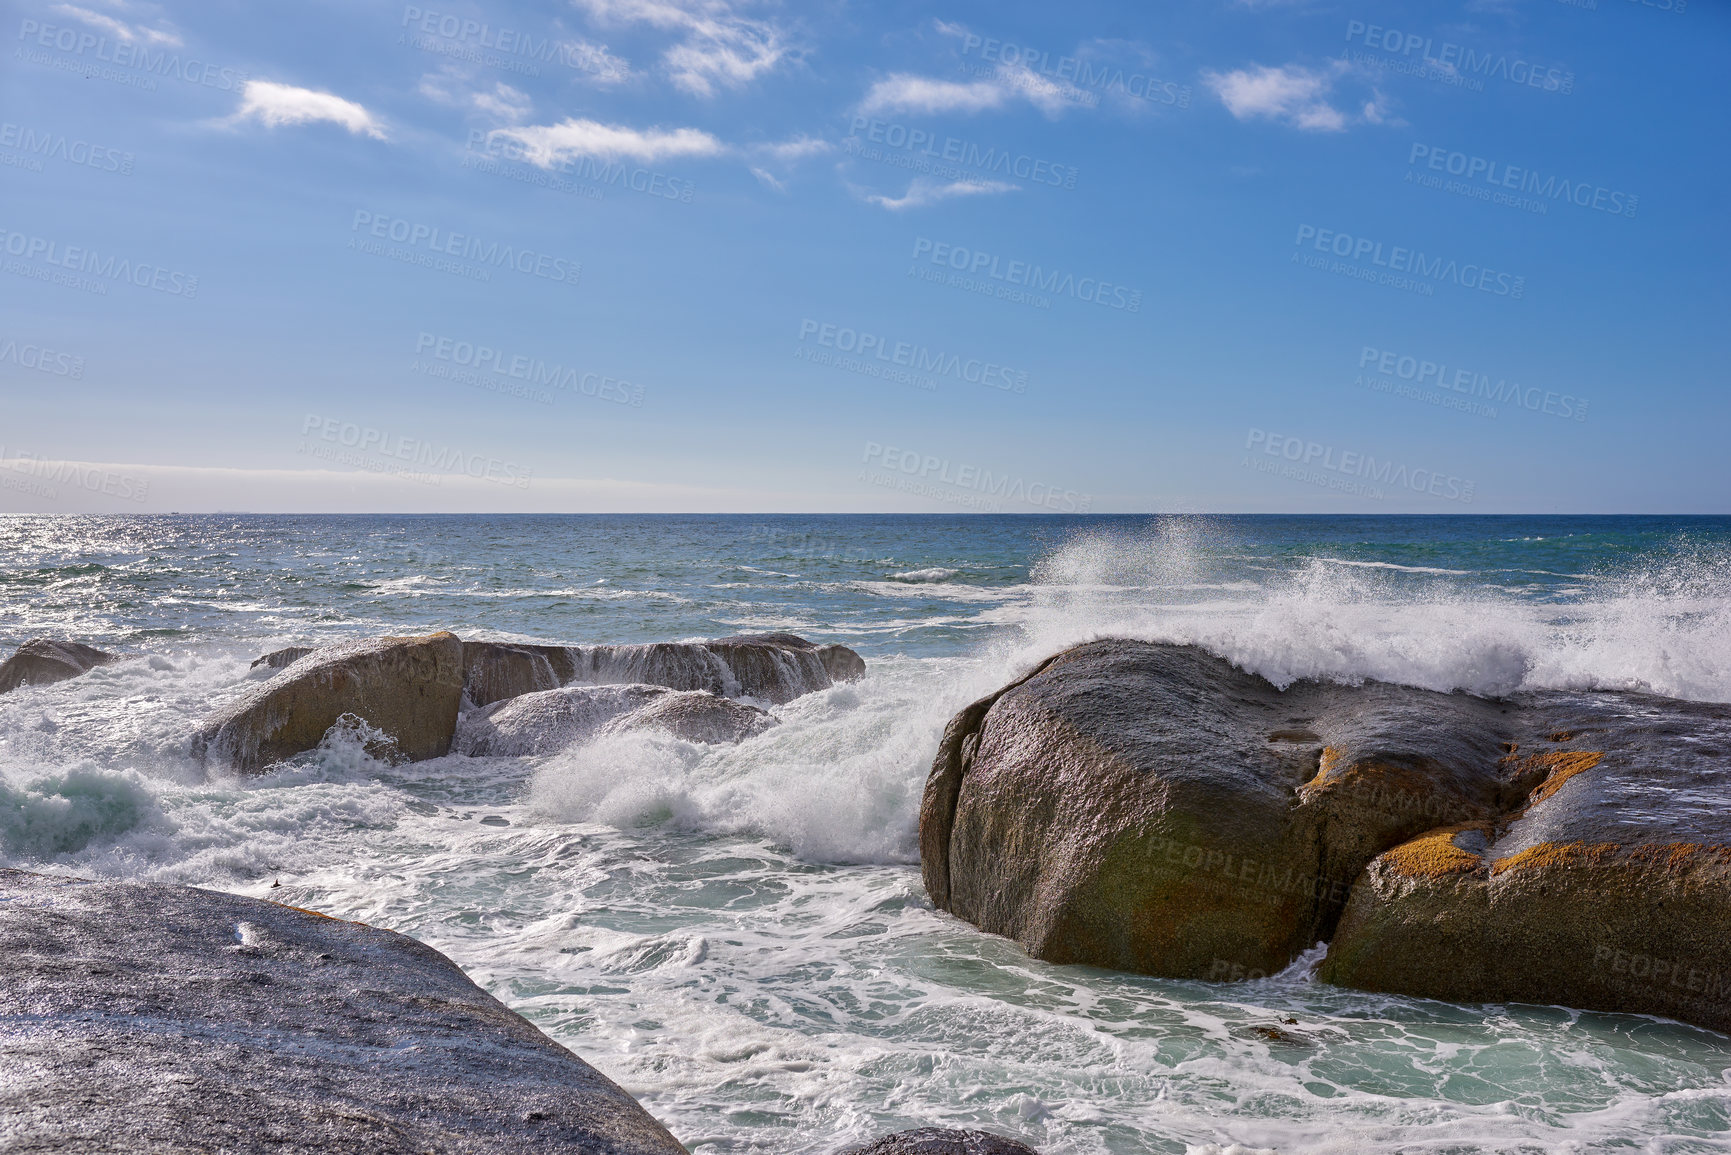 Buy stock photo Beautiful landscape view of the rough ocean waves breaking on large boulders with a blue sky background. Tidal waves crashing into rocks on the windy wild coast and beach of Cape Town, South Africa